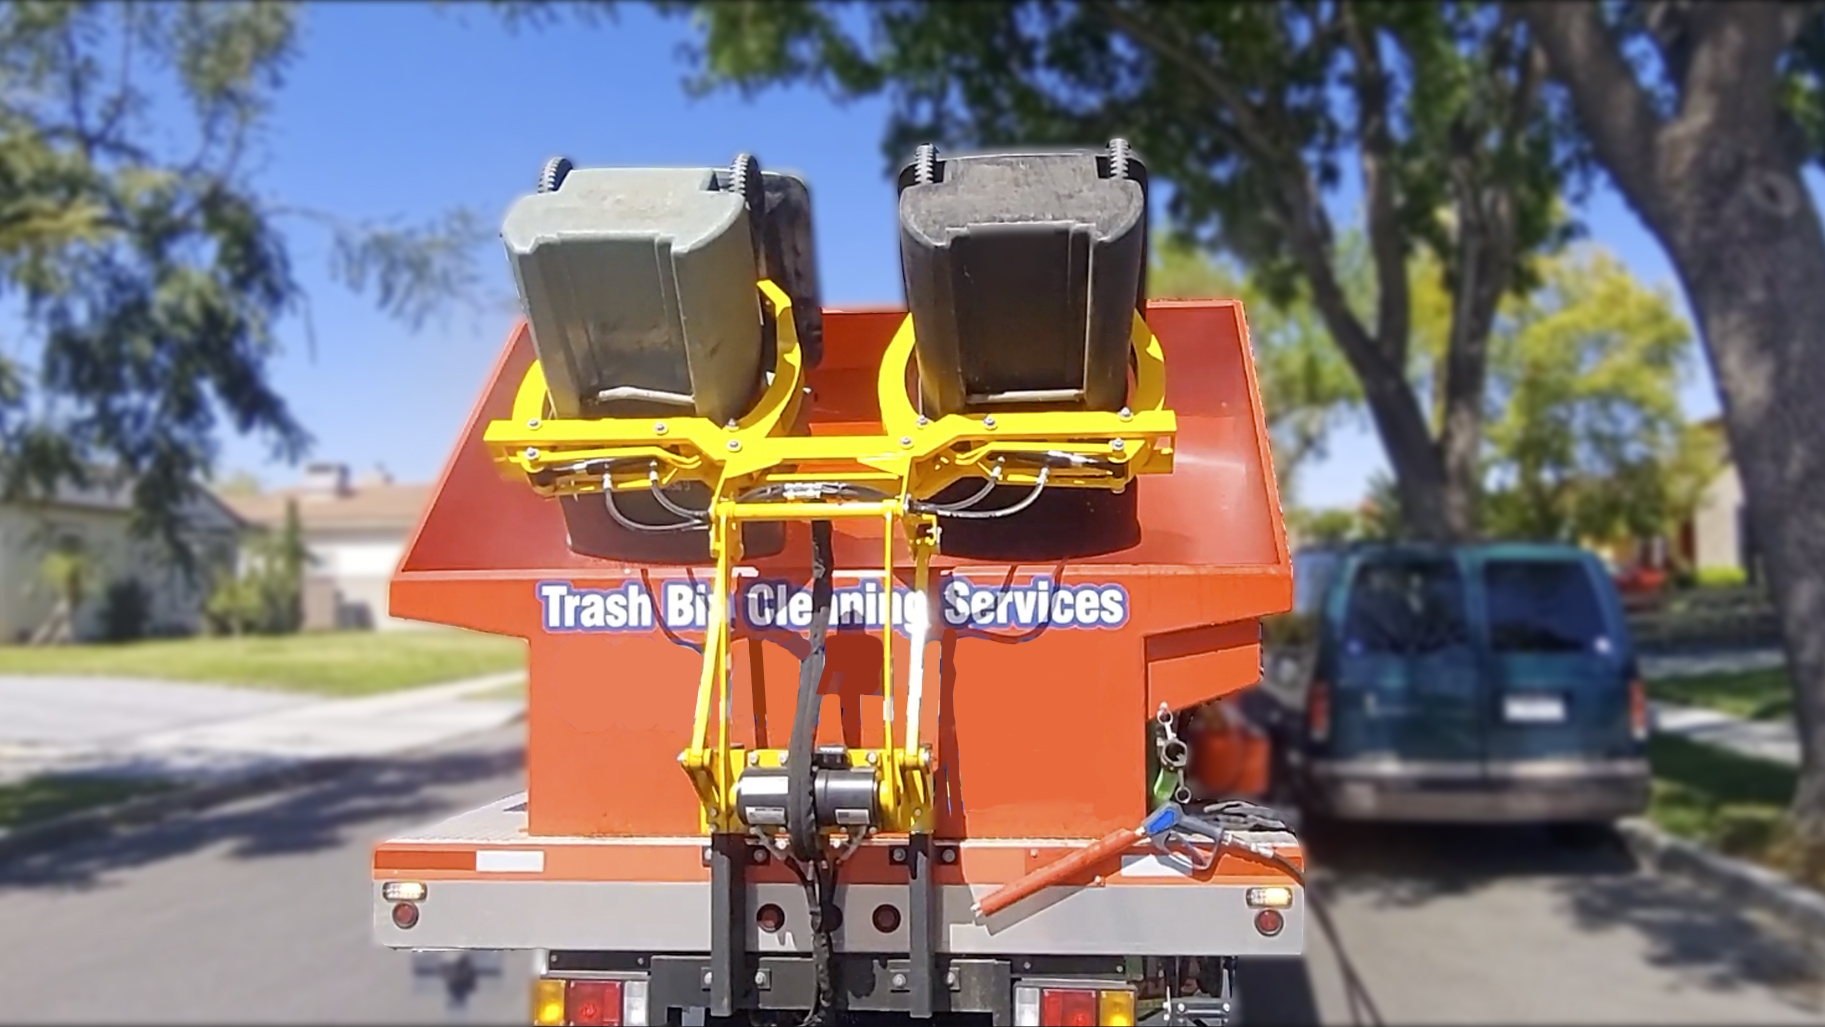 TRASH BIN CLEANING SERVICES LOCATOR